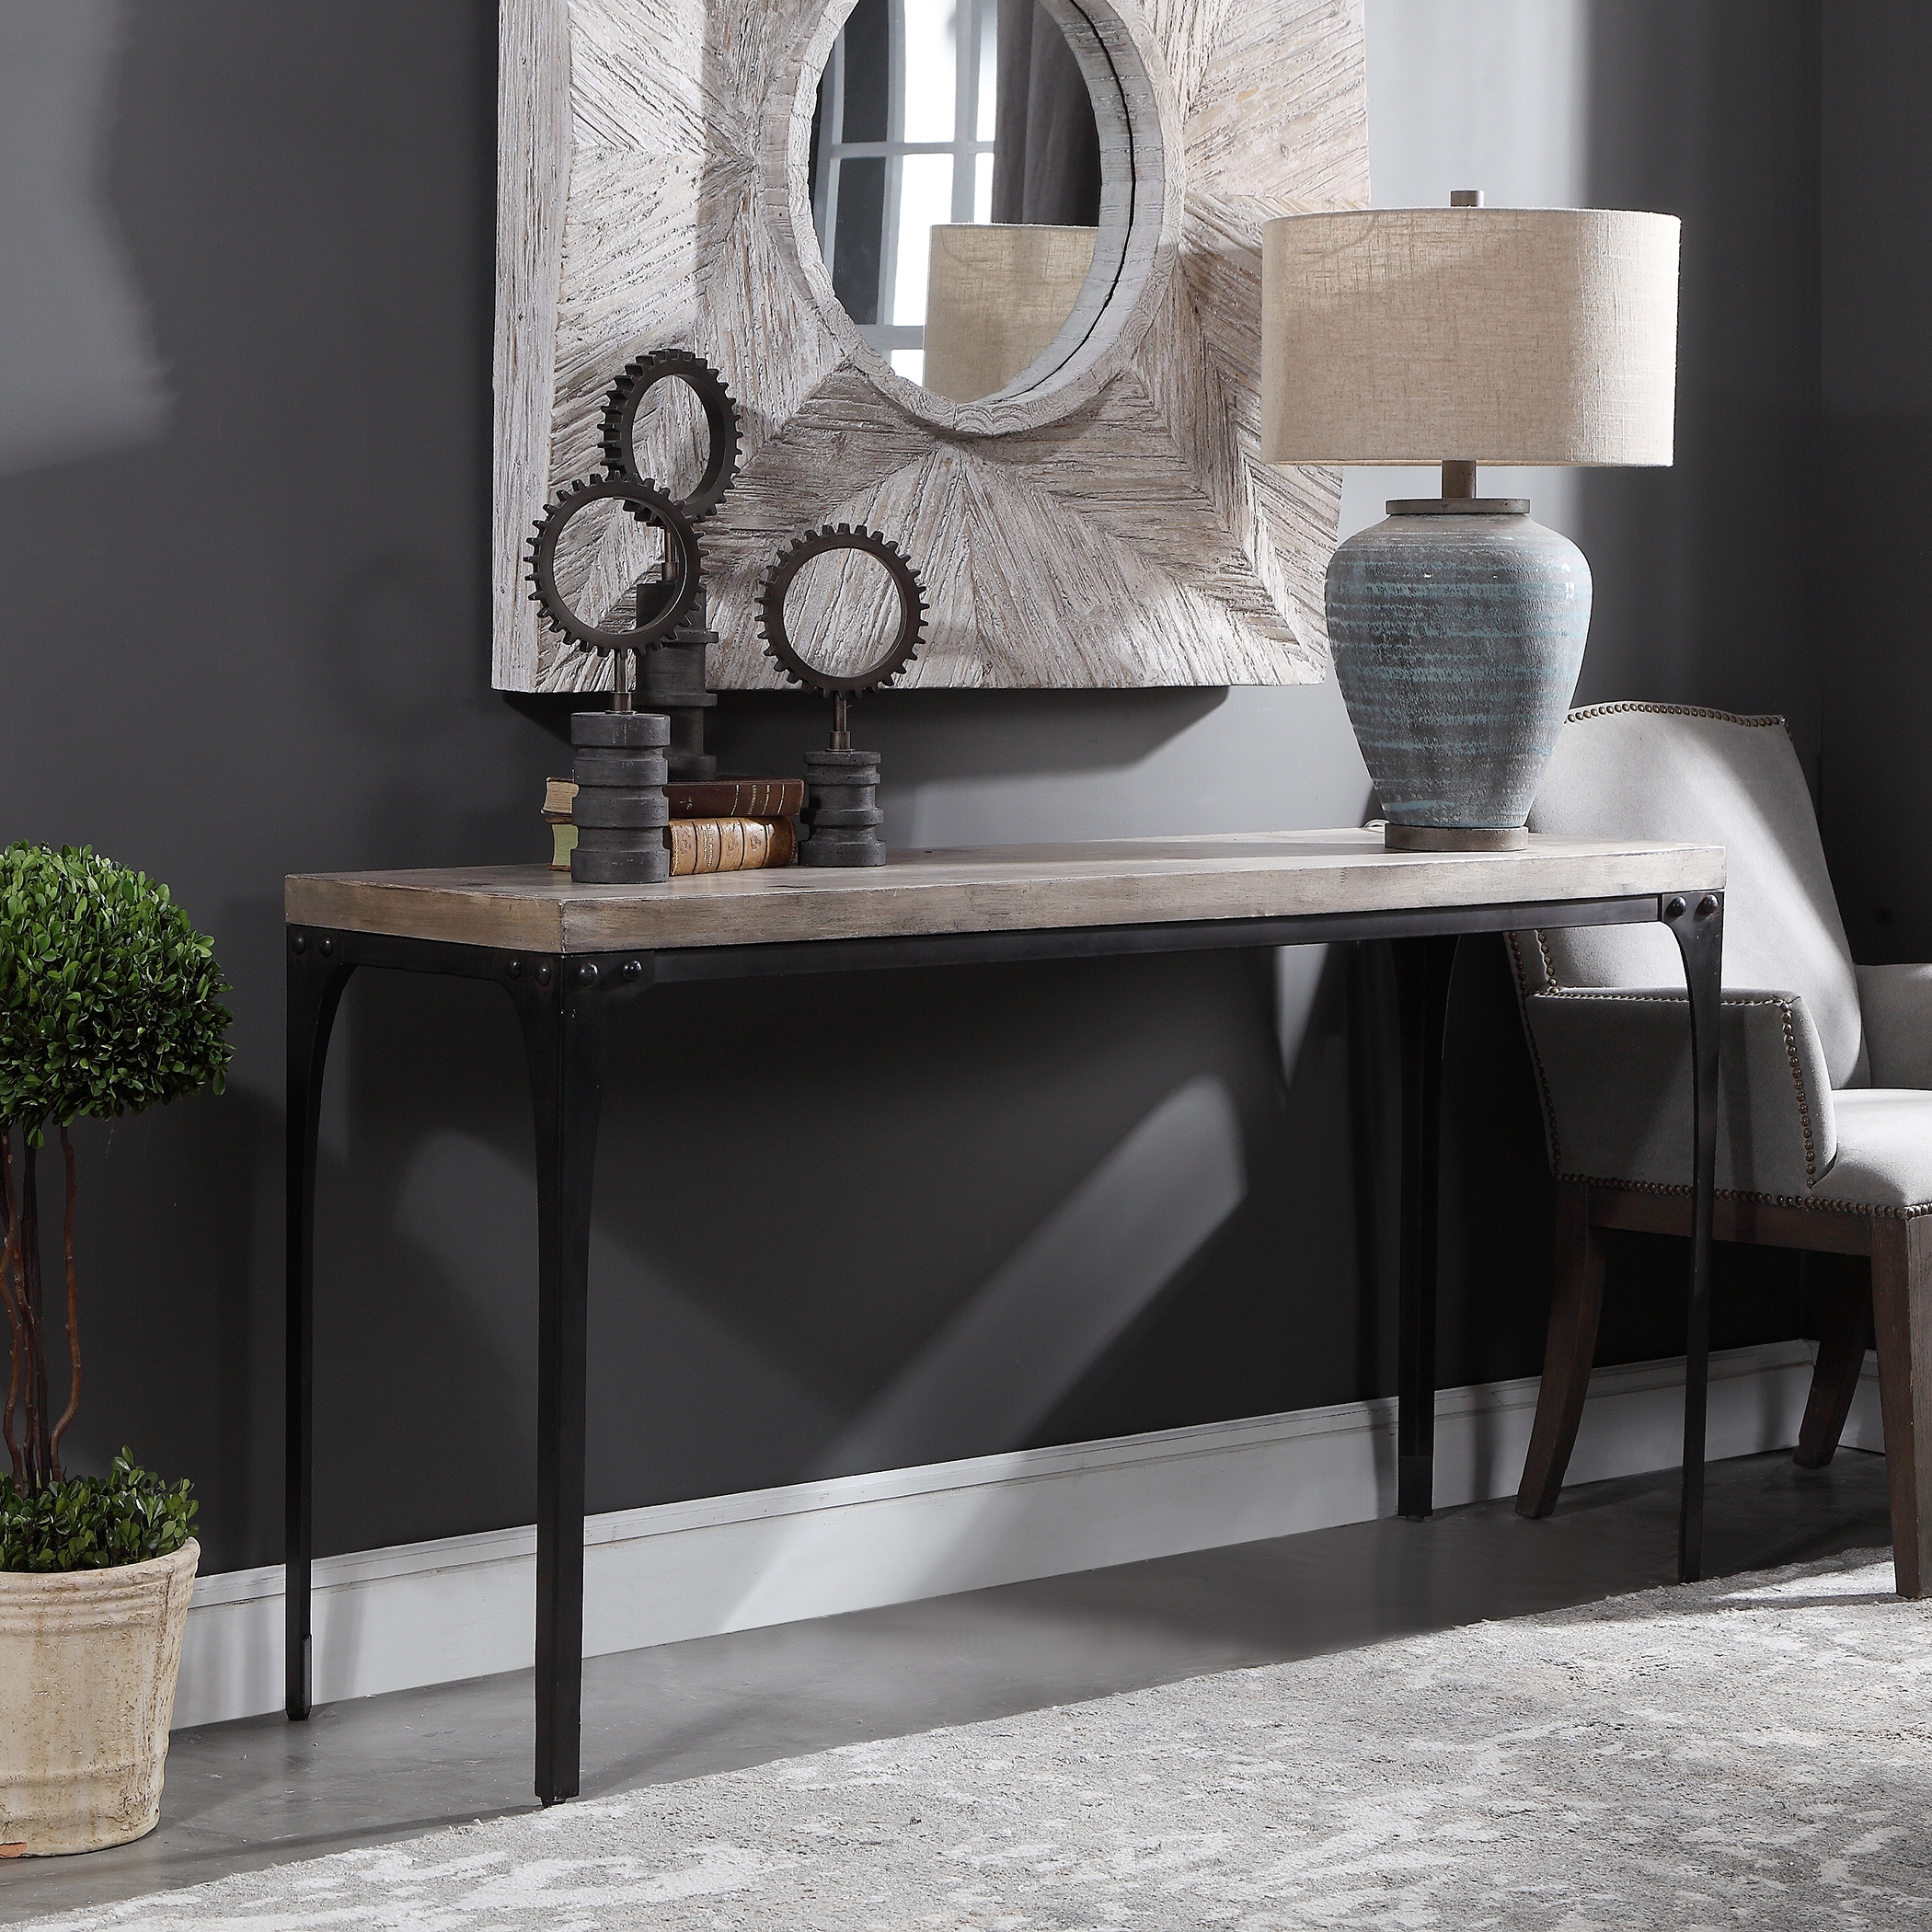 Blaylock Industrial Console Table - Image 1